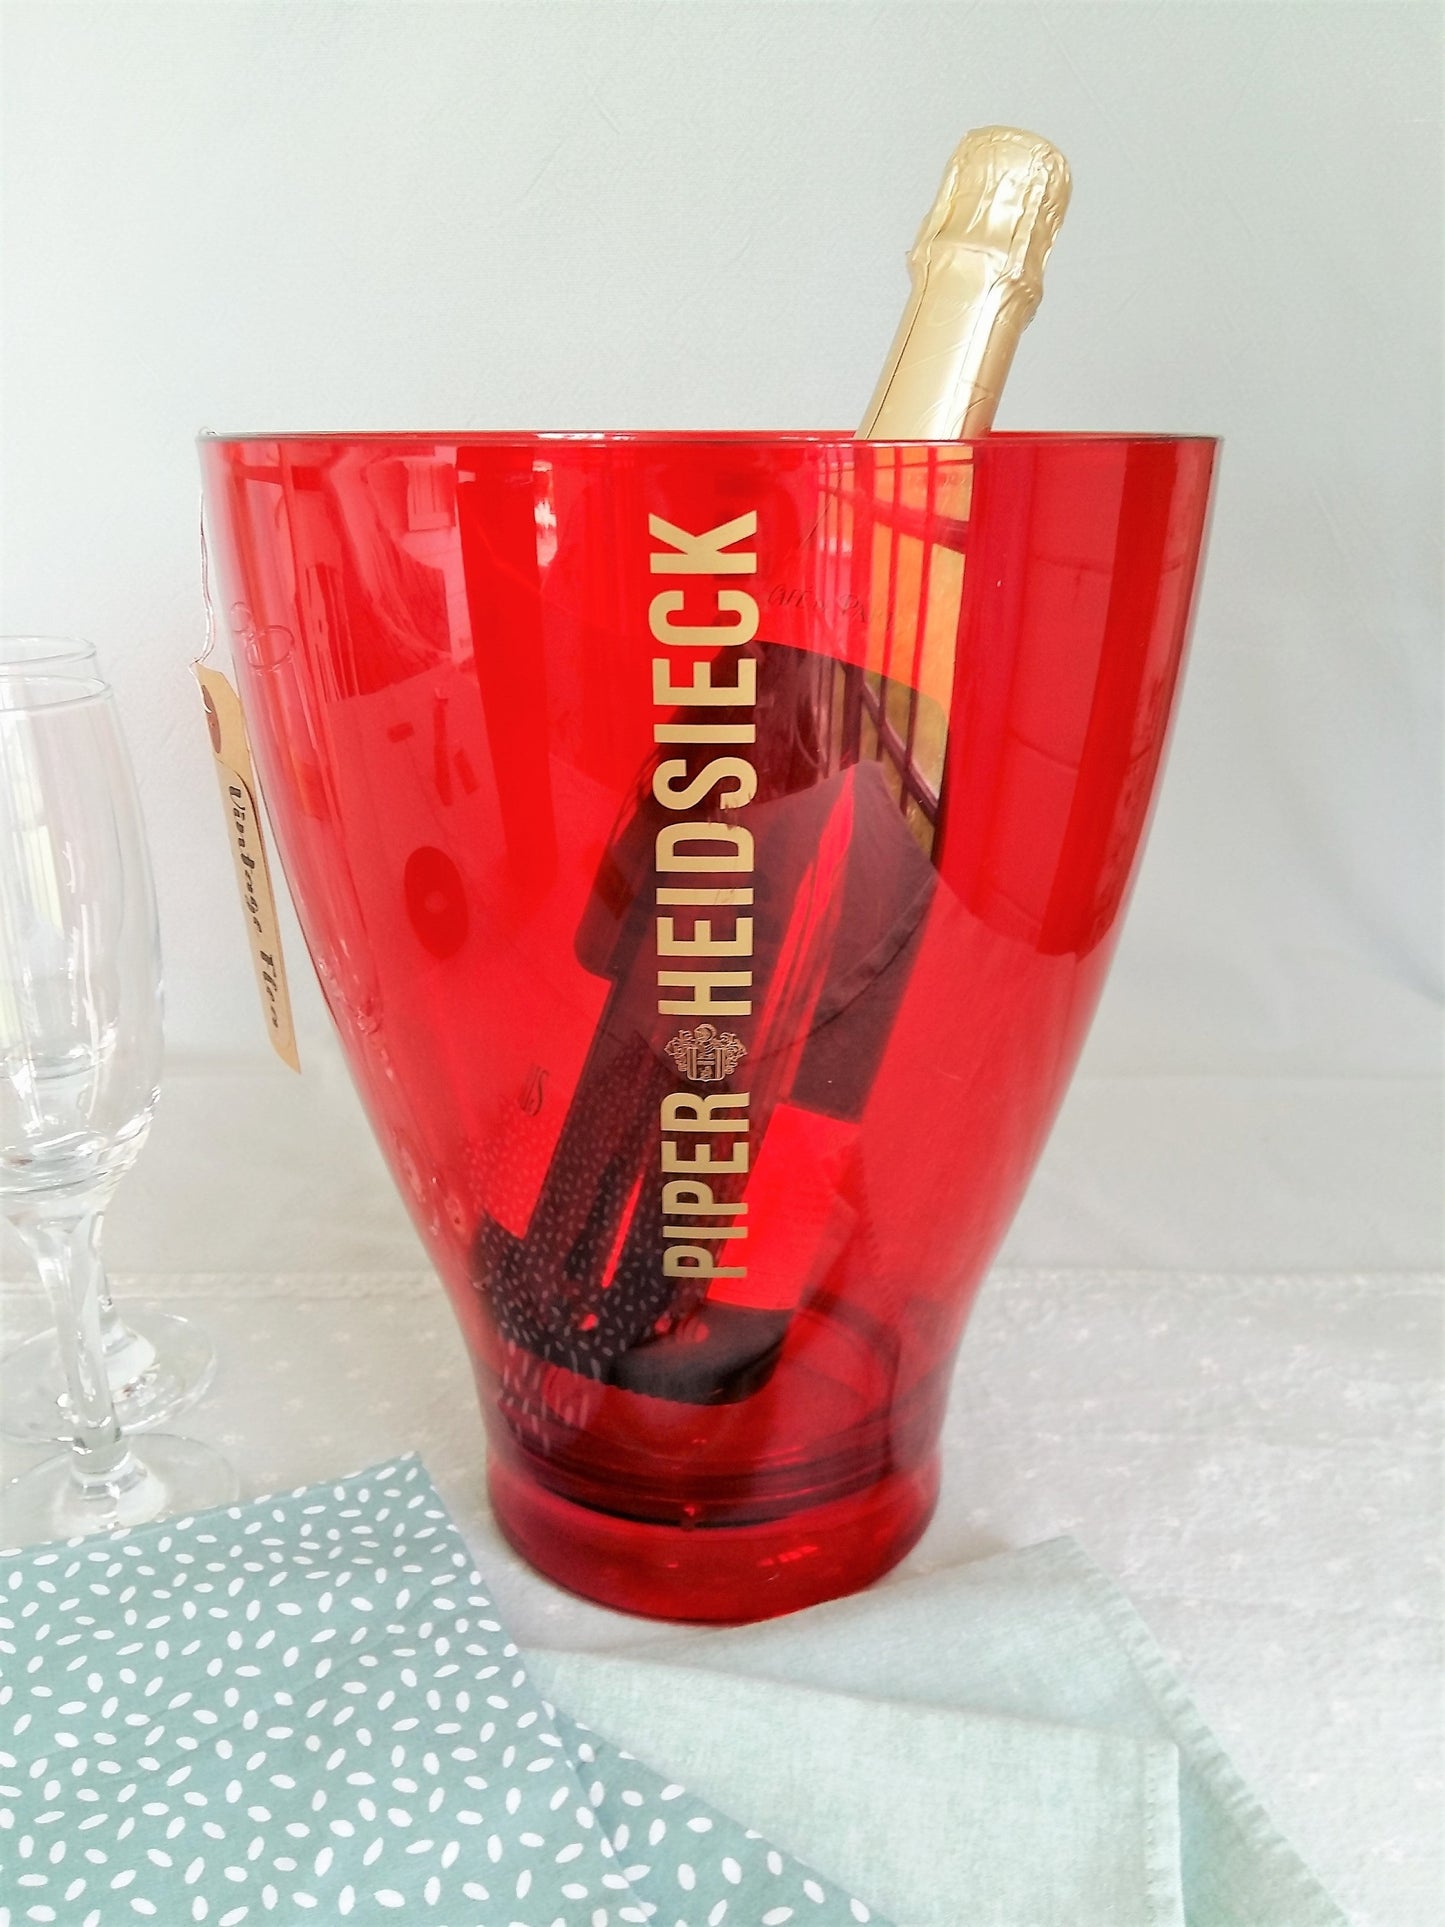 Piper Heidsieck Champagne Ice Buckets. from Tiggy & Pip - €75.00! Shop now at Tiggy and Pip